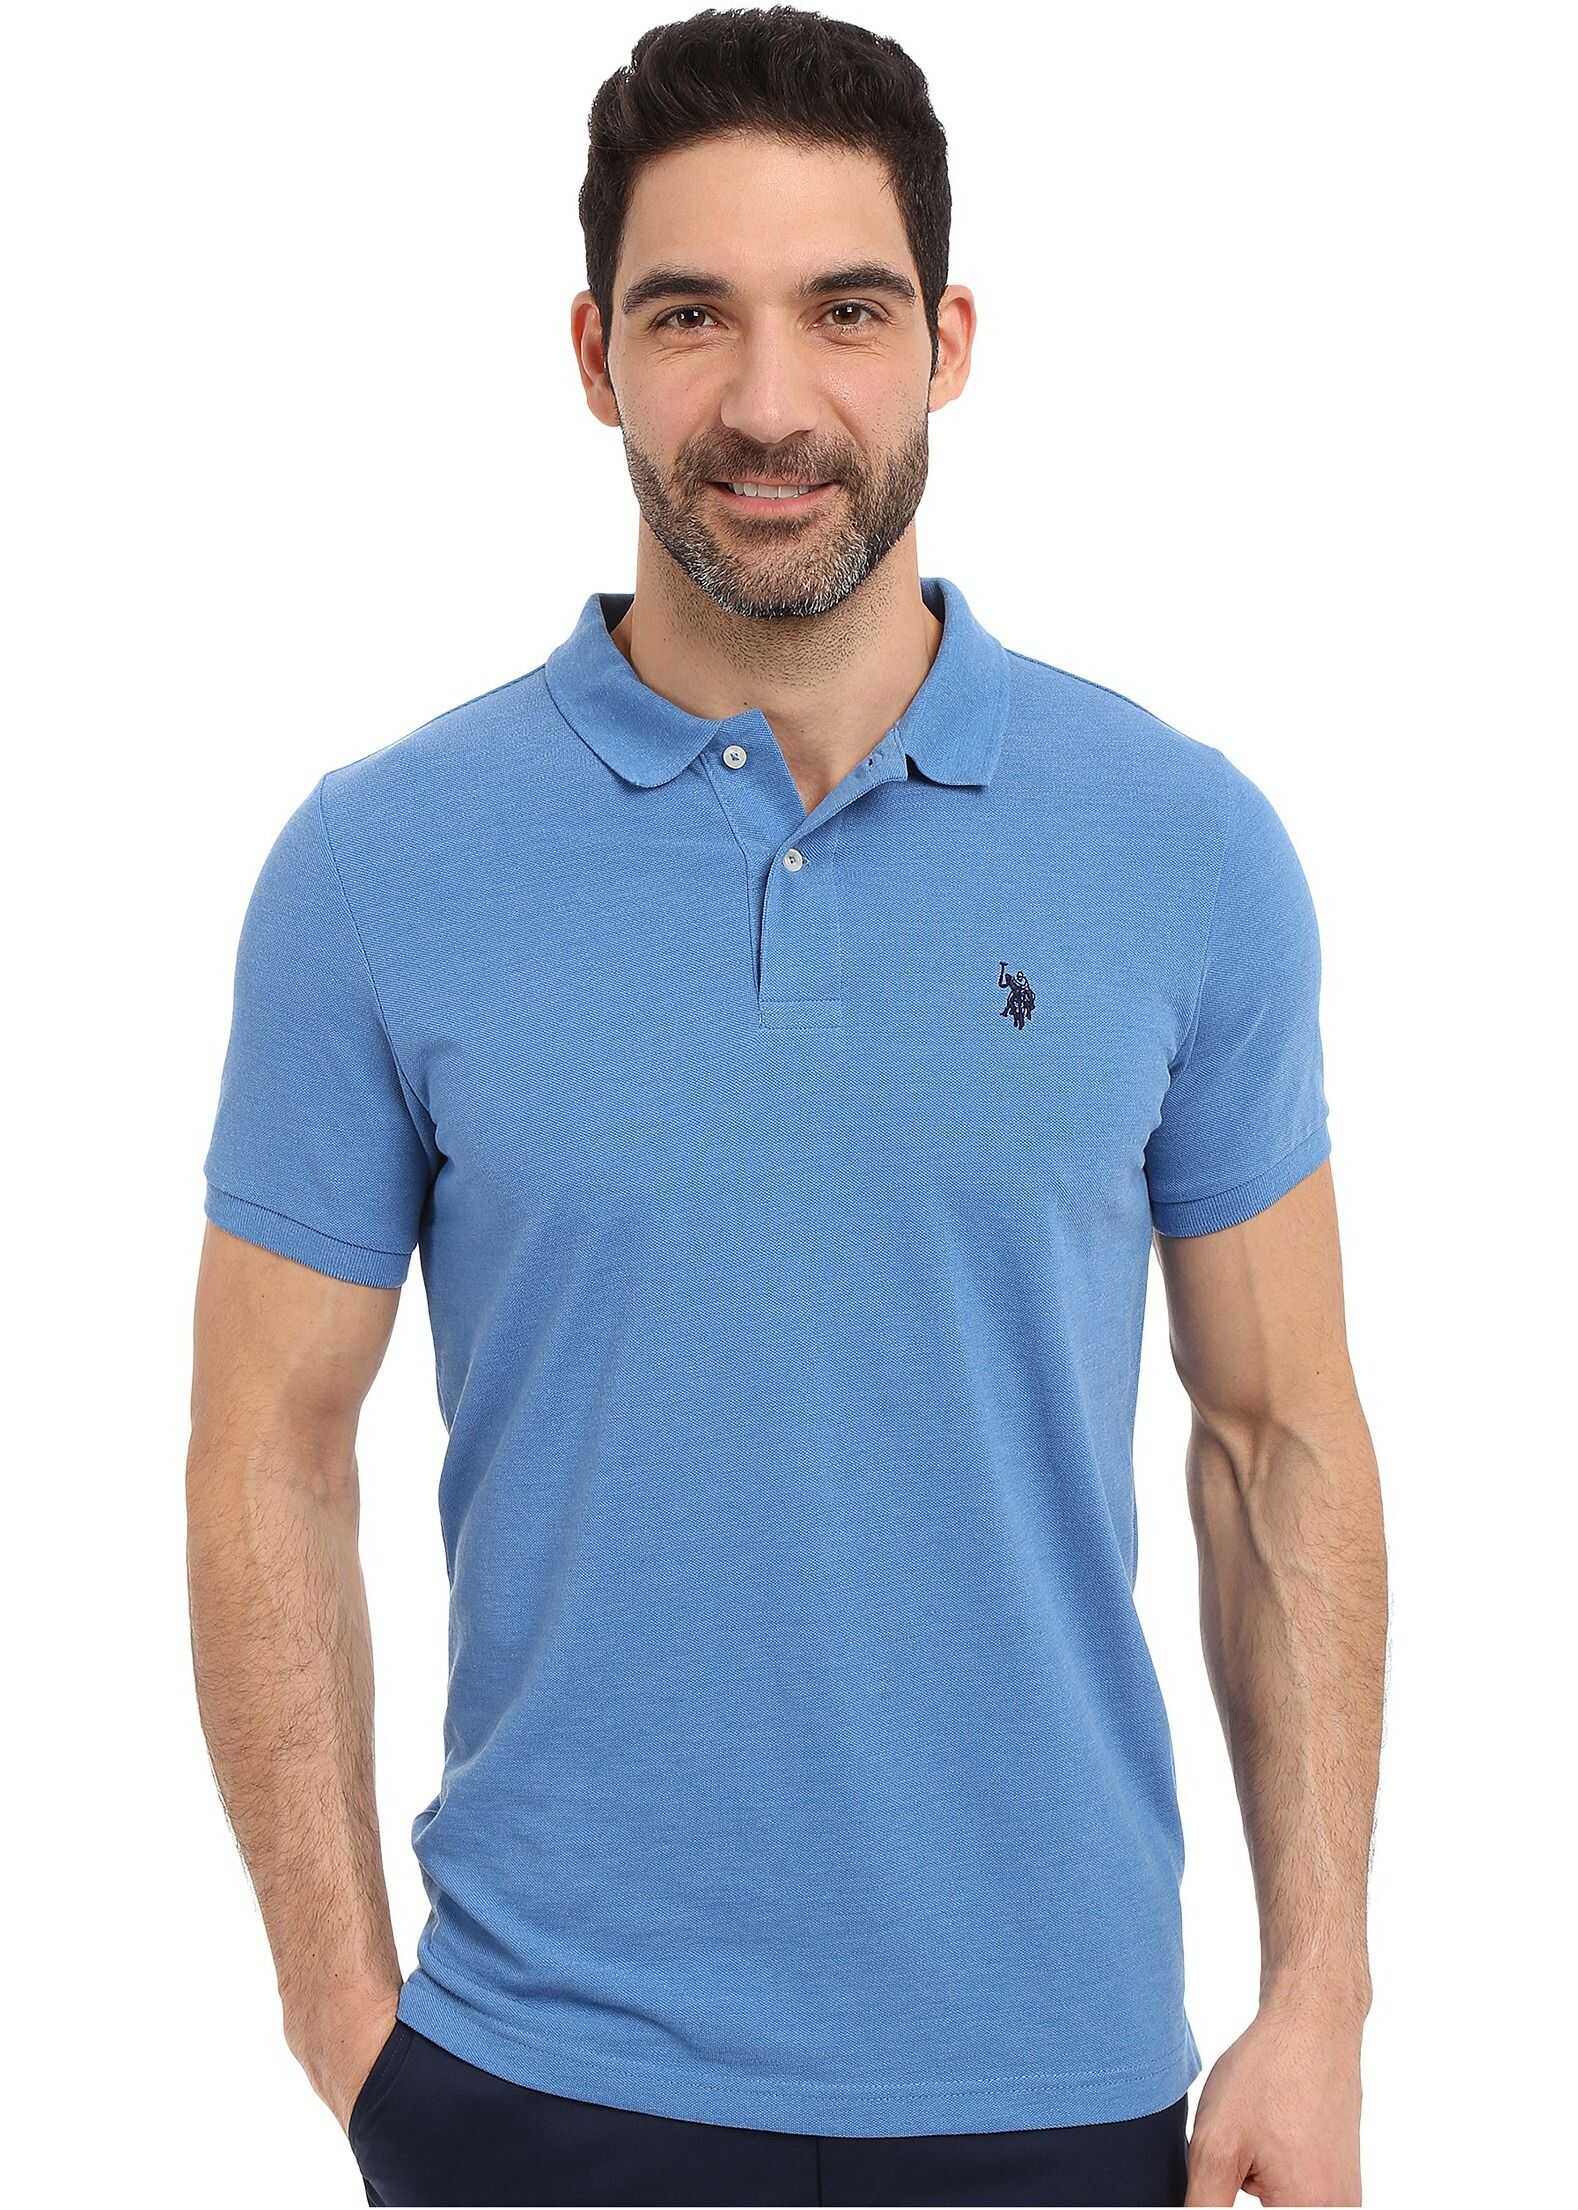 U.S. POLO ASSN. Solid Cotton Pique Polo with Small Pony Blue Tile Heather